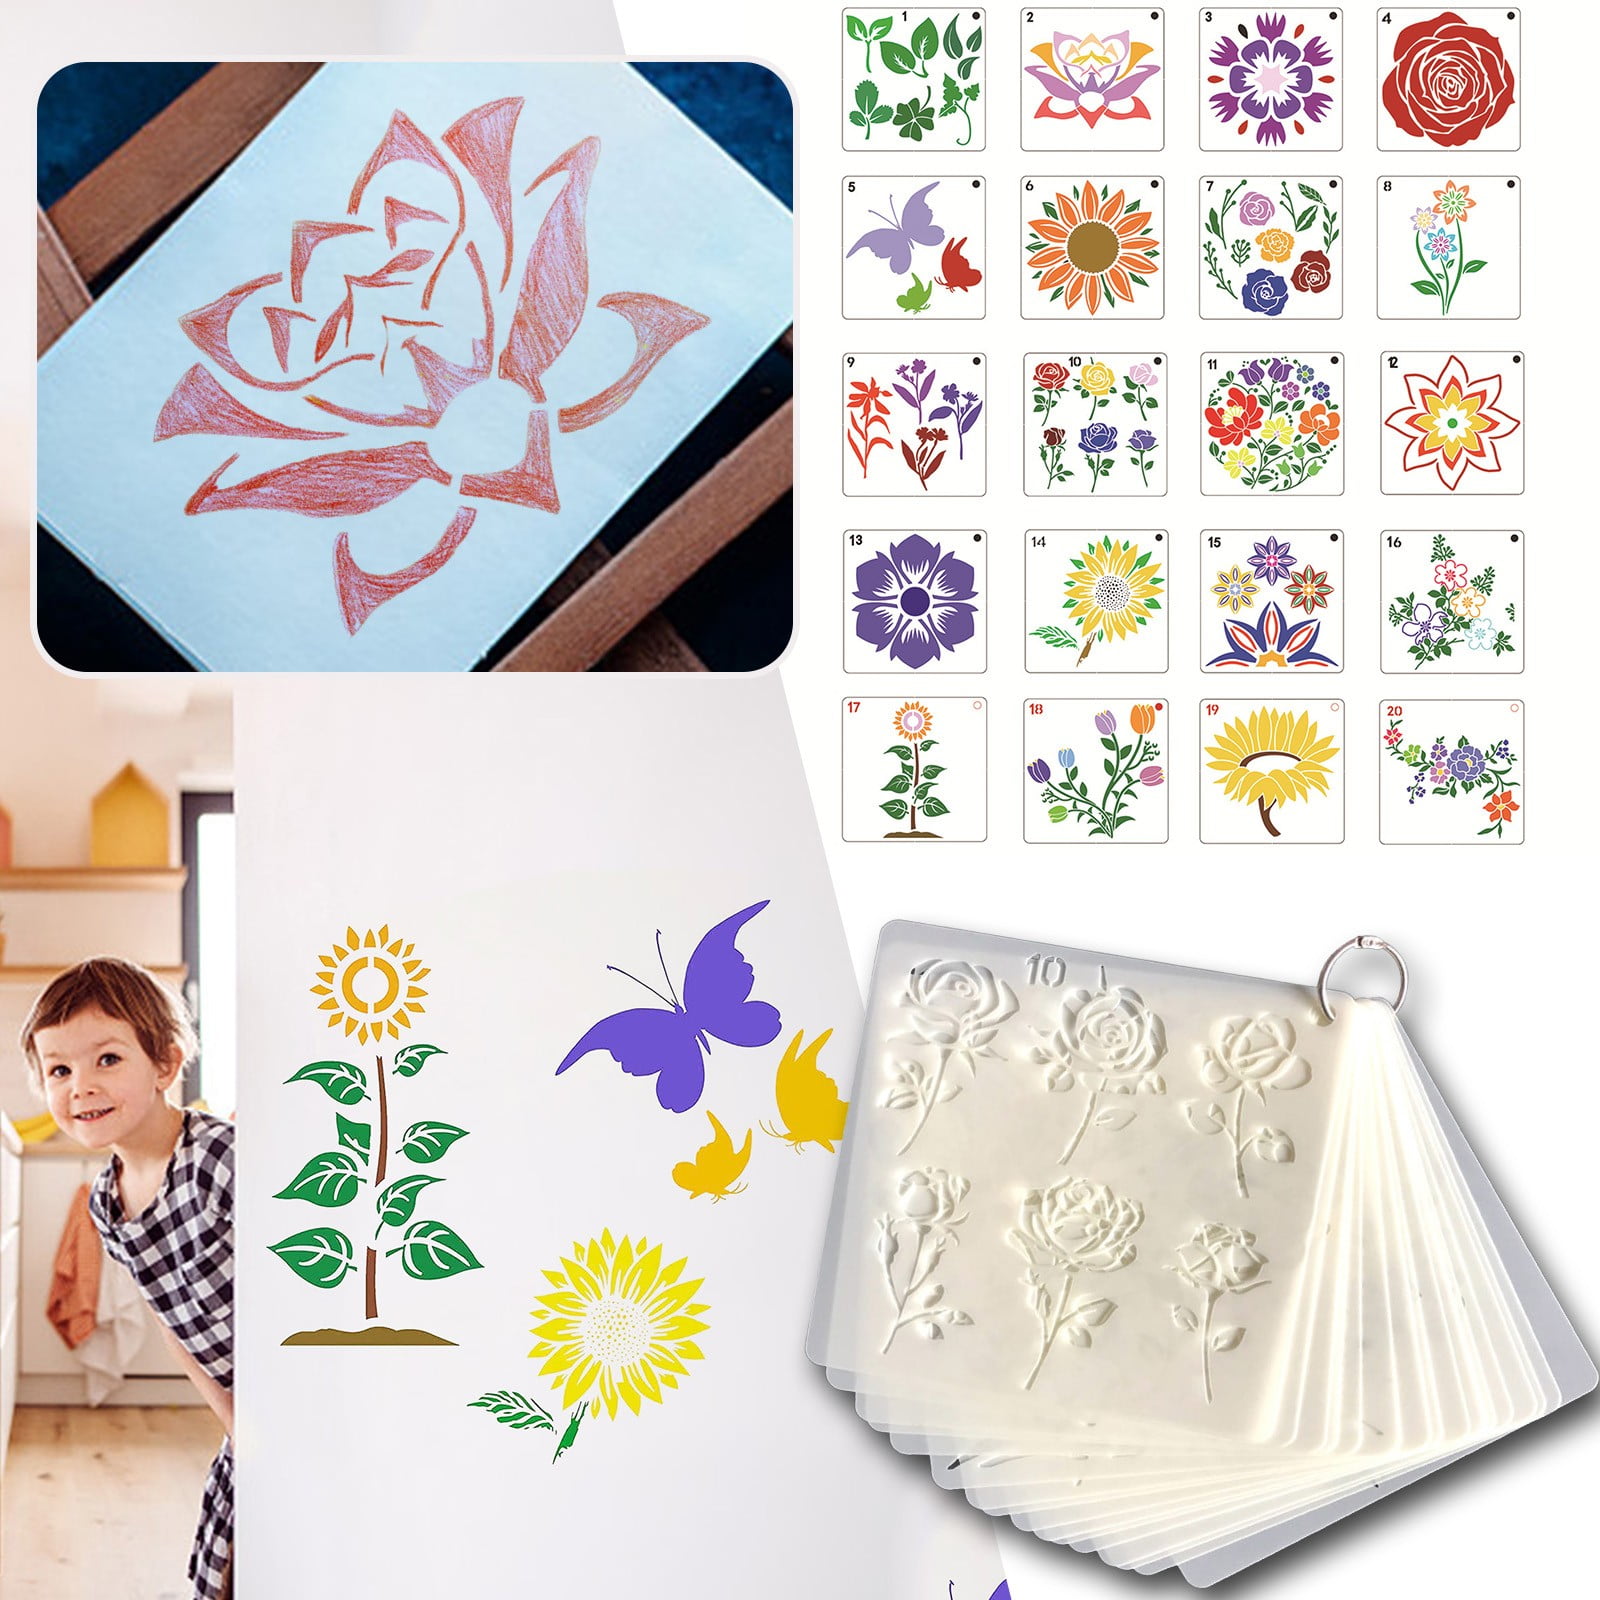 6pcs Flower Stencils for Painting,8x10 Inch Reusable Summer Floral Stencils Including Sunflower/Rose/Butterfly/Lotus/Hummingbird/Hibiscus /Leaves Stencils